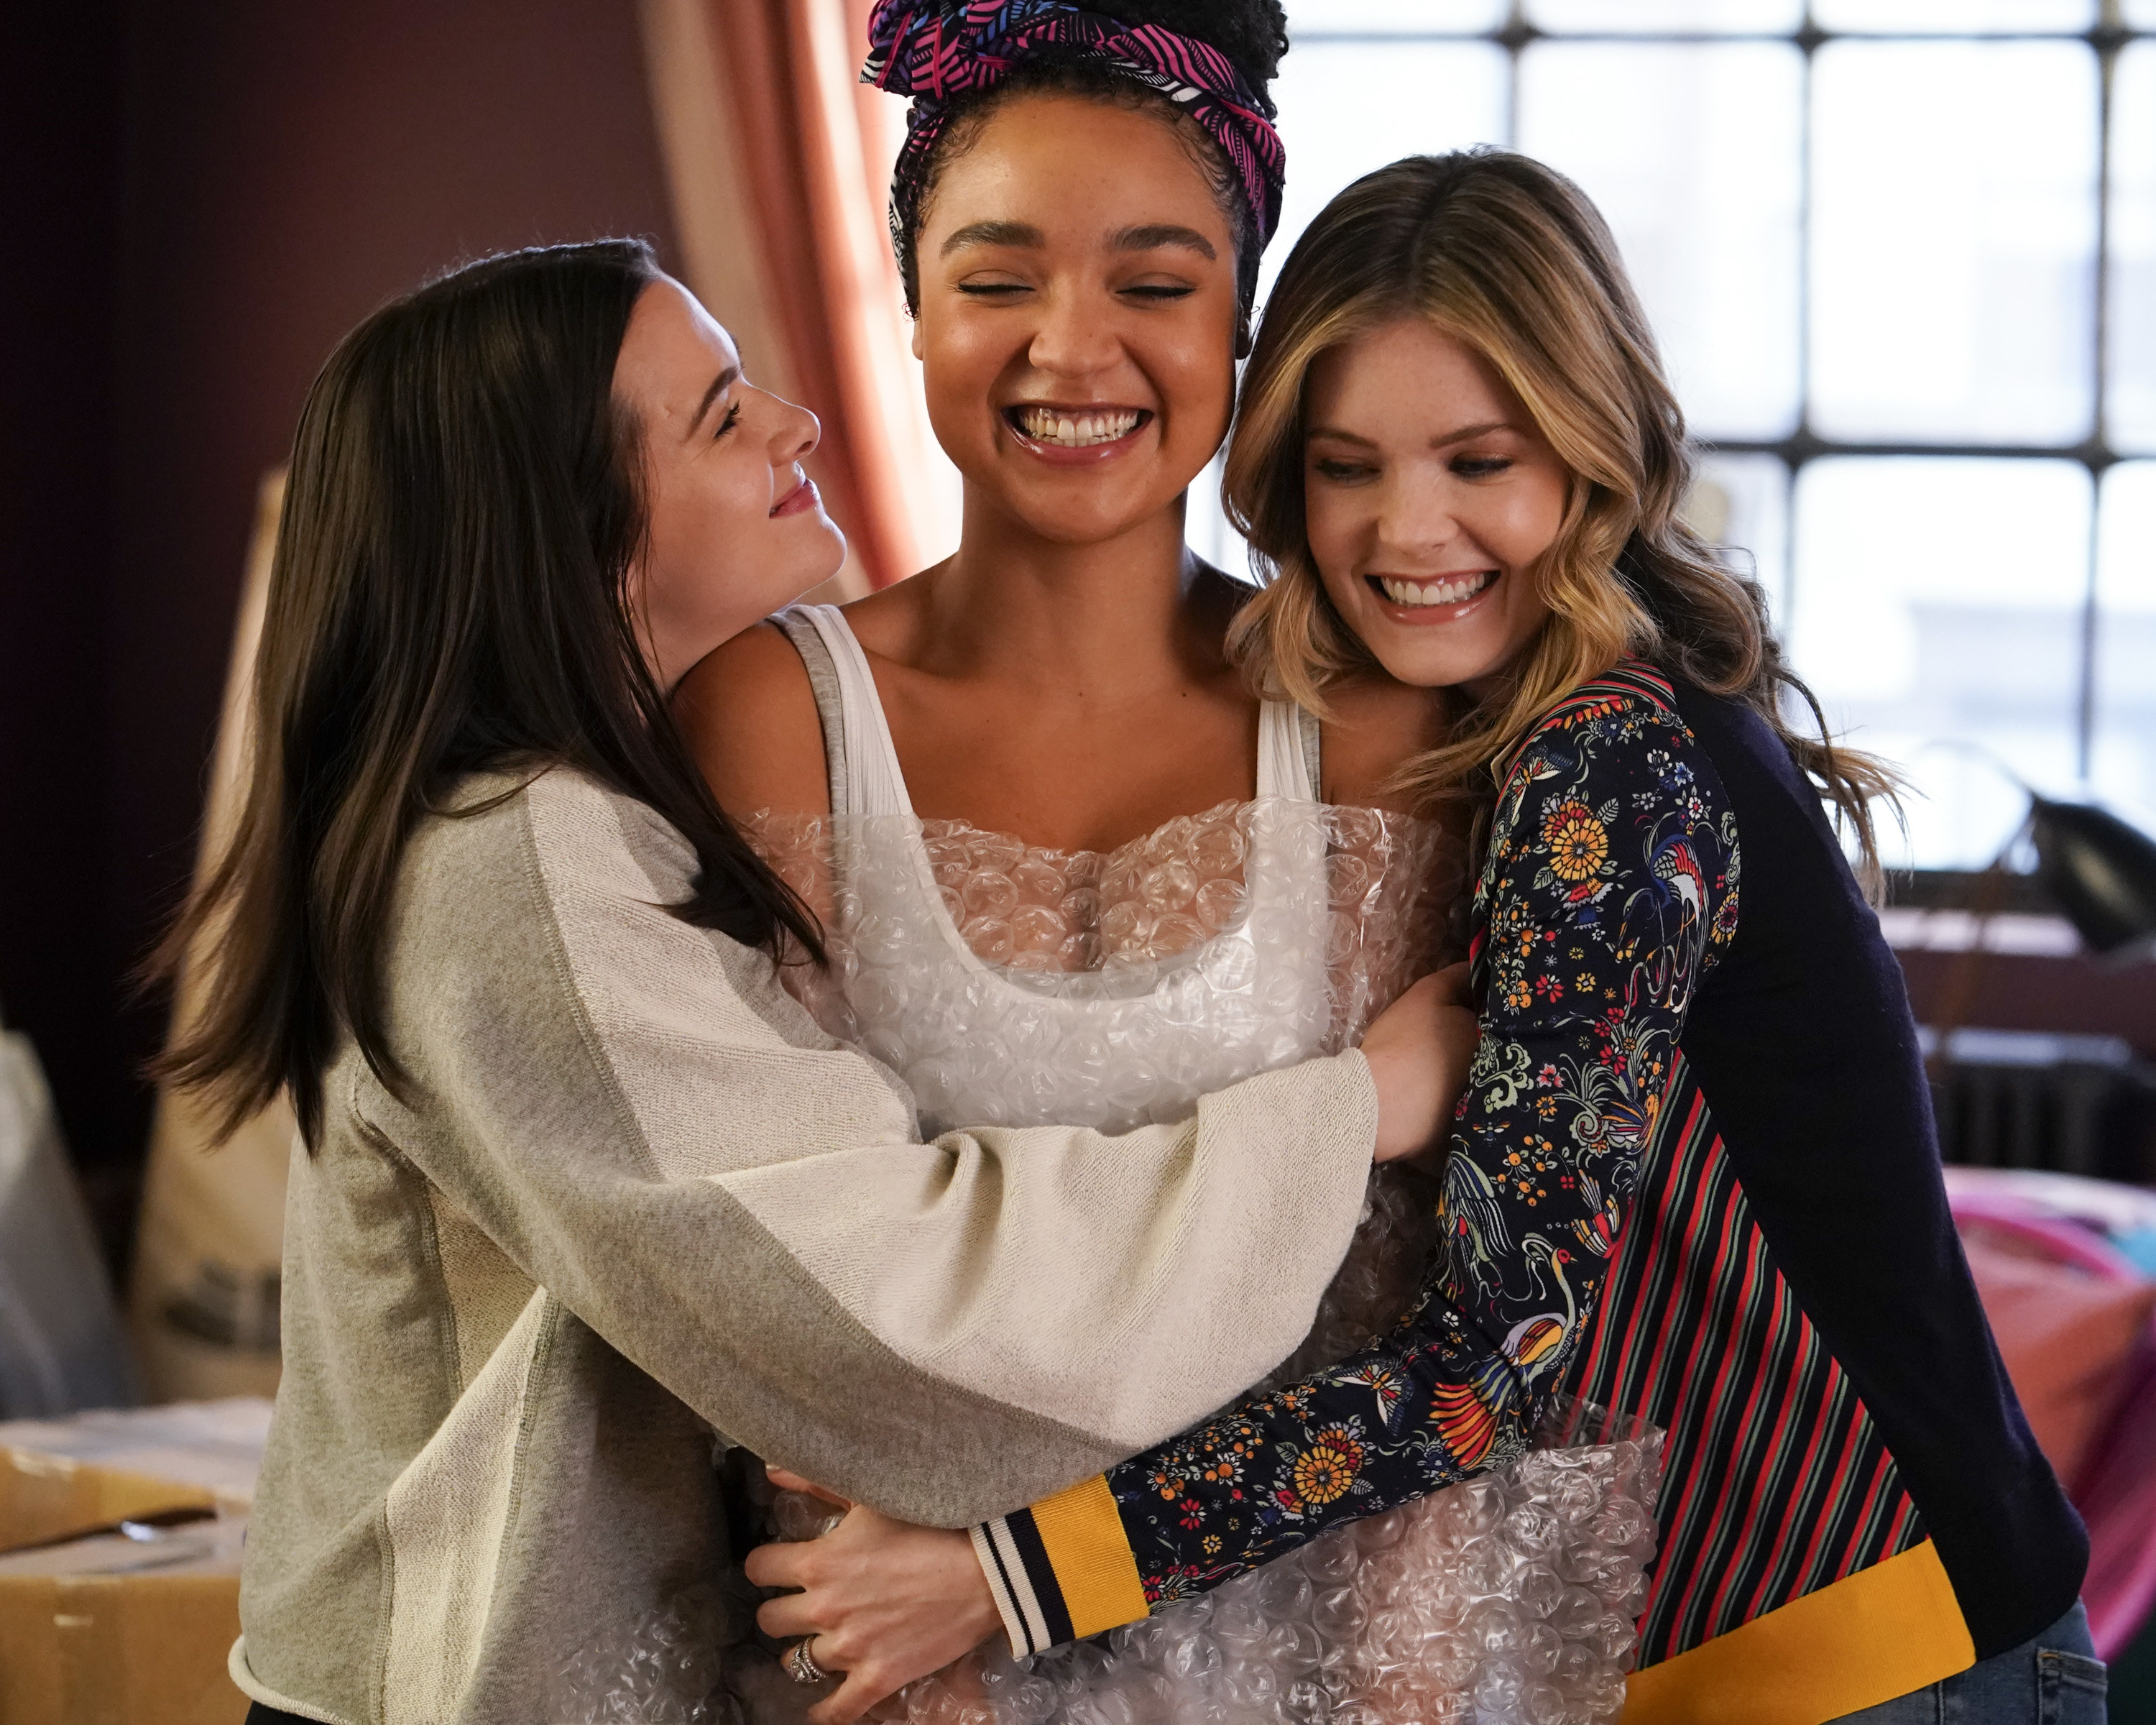 Katie, Aisha, and Meghann hugging during a scene